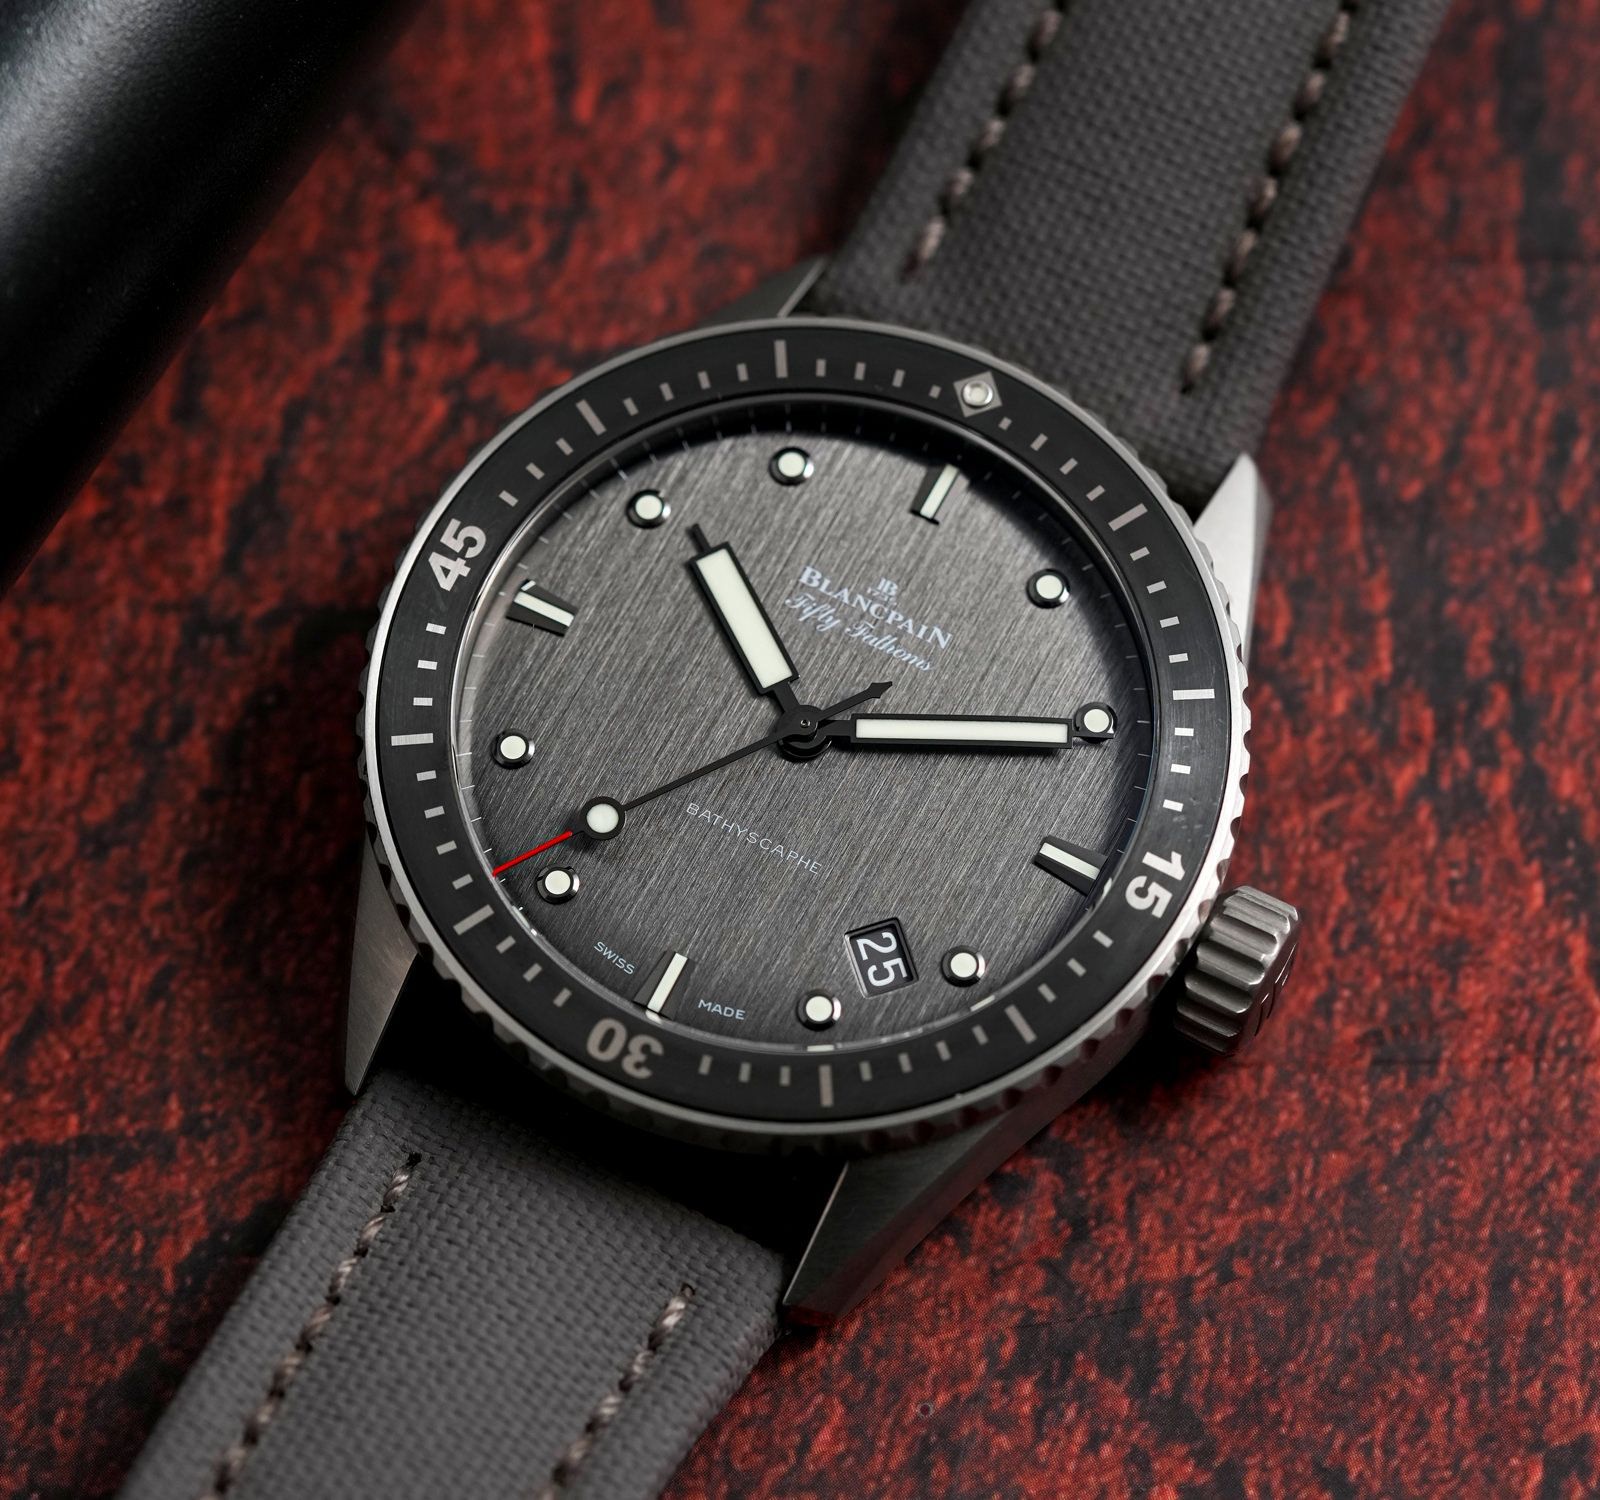 Second Hand Blancpain Fifty Fathoms